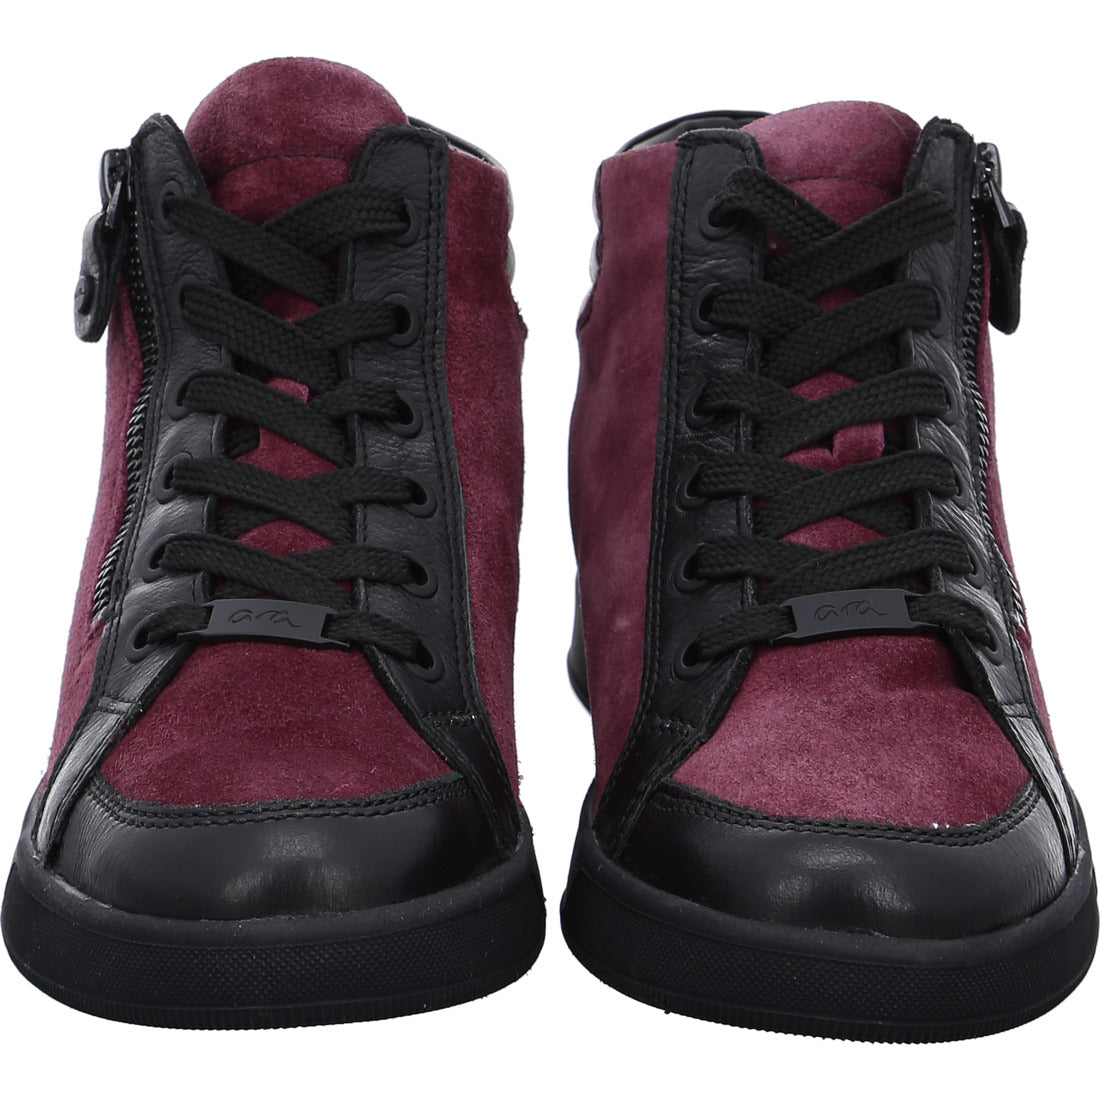 ROM HIGHSOFT BOOTS LEATHER BAMBOO LUP ZIP